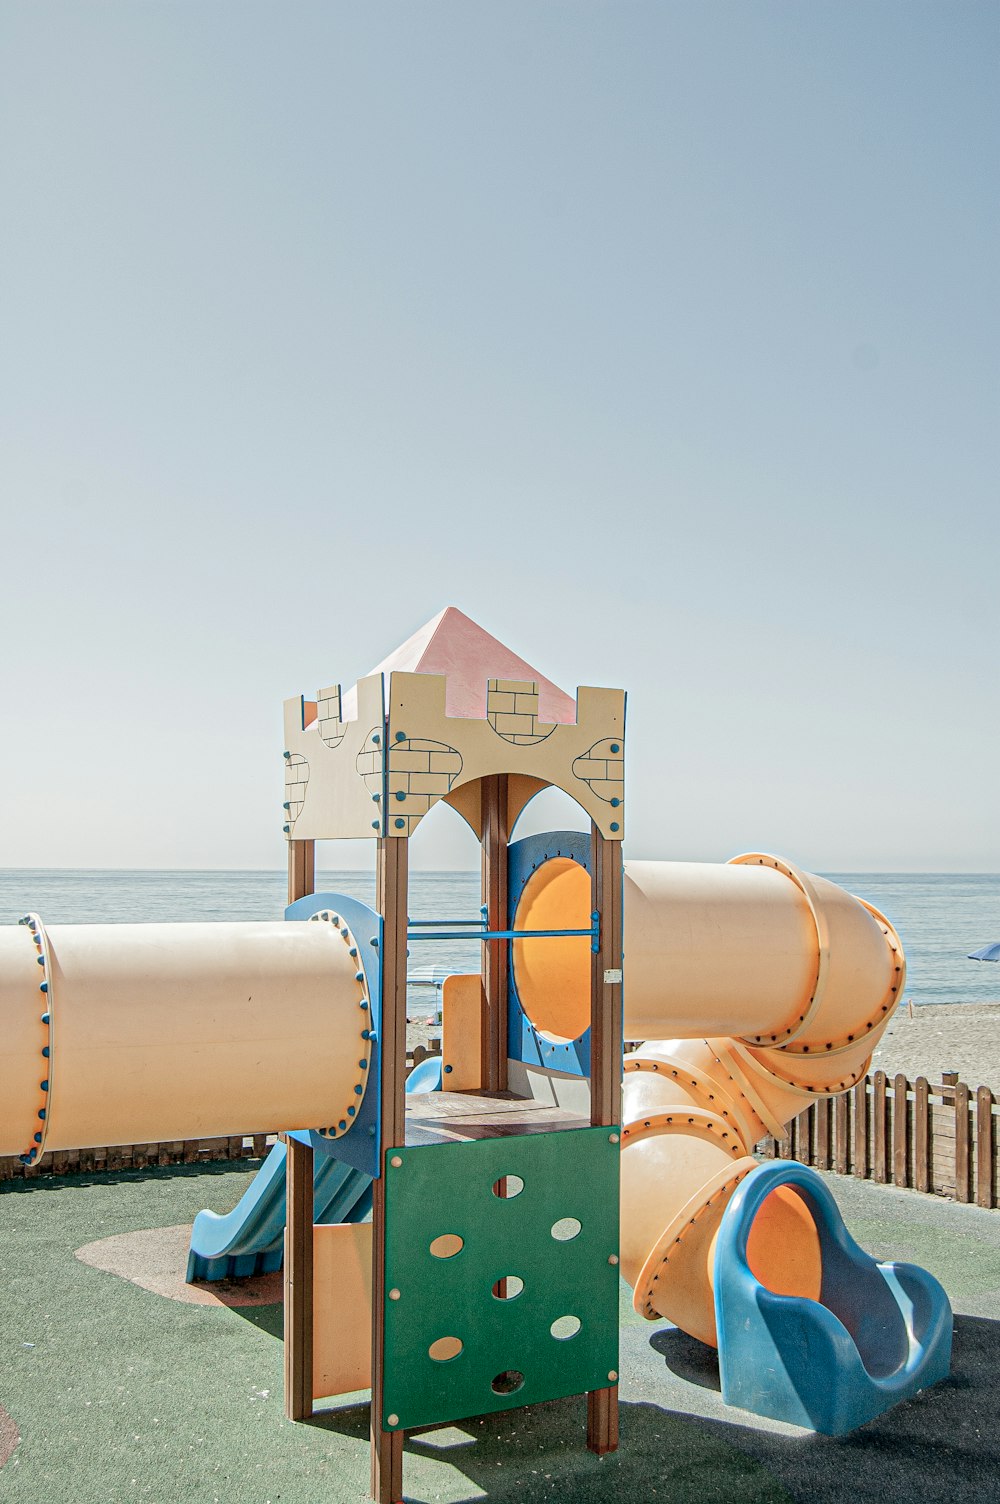 a children's play area at the beach